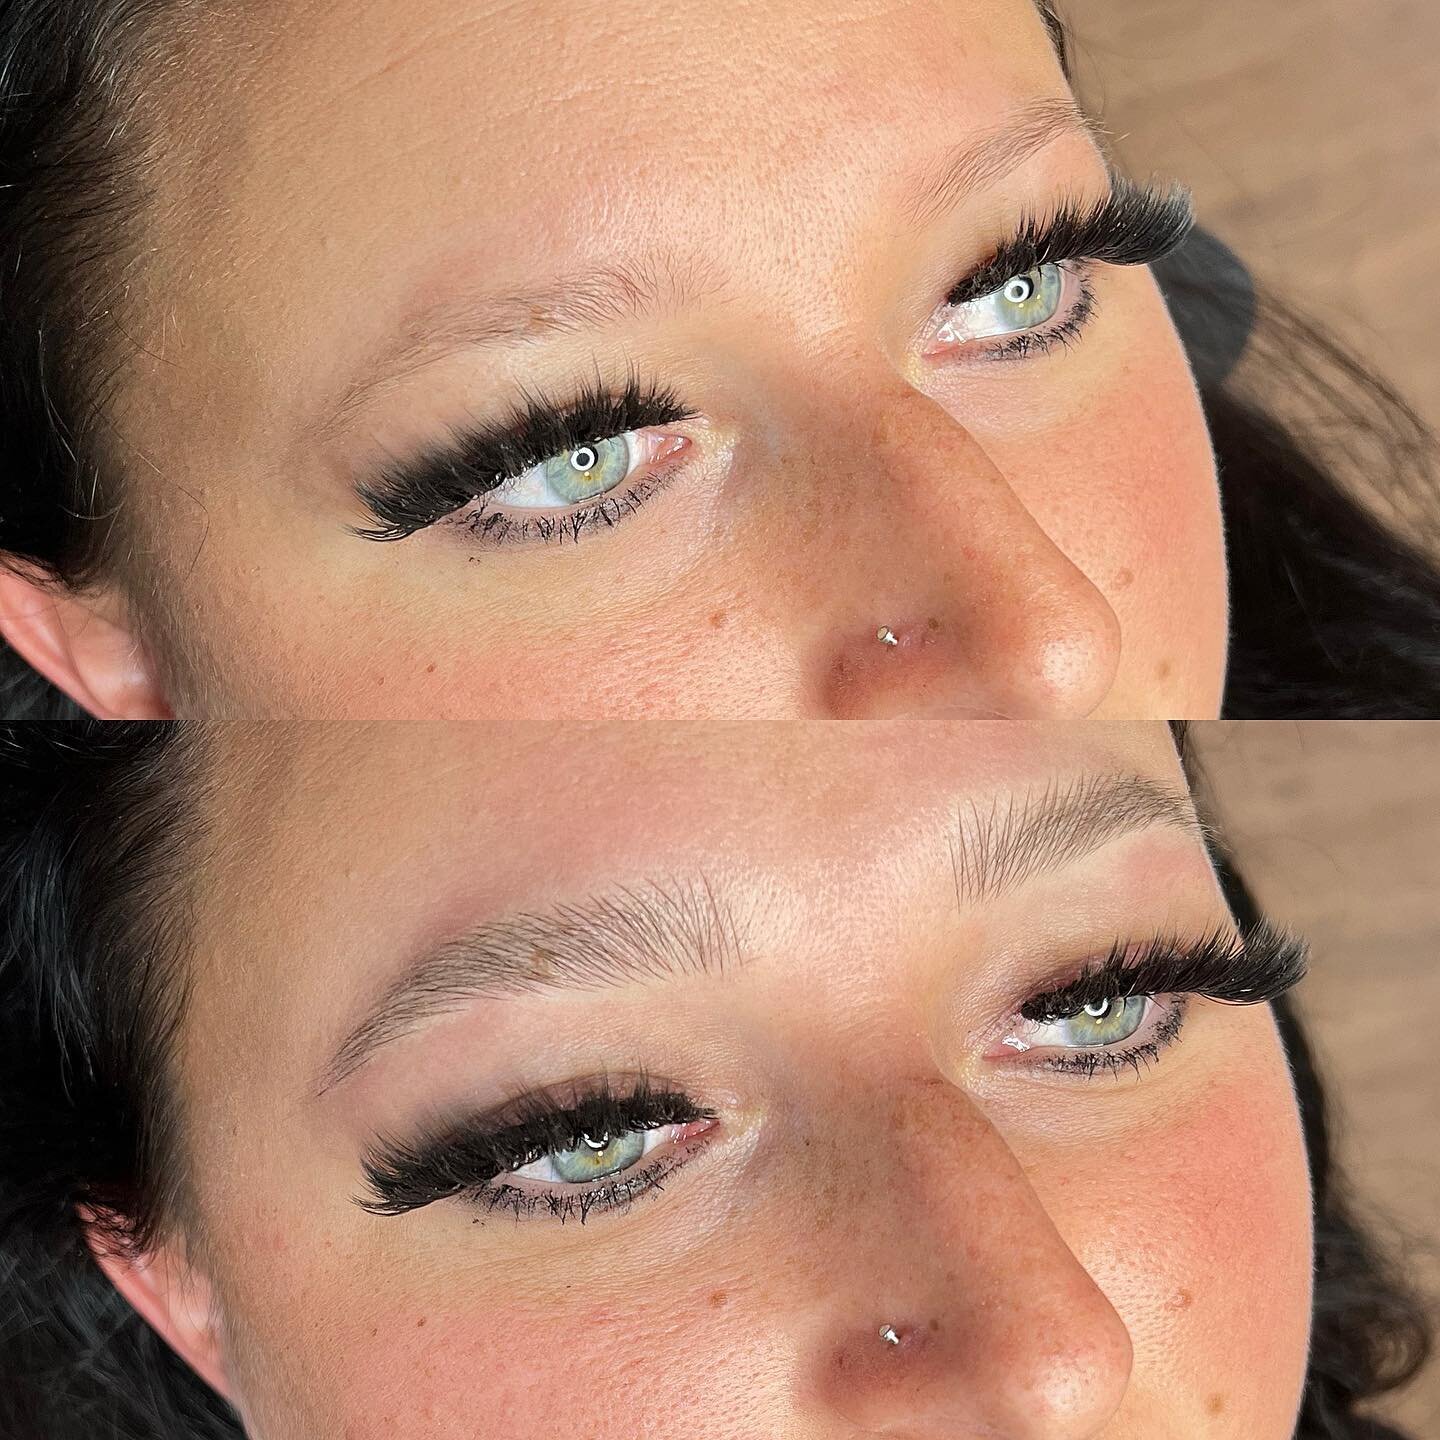 First session Microblading.✨
.
#knoxvillemicroblading #knoxvillelashes #ashevillemicroblading #ashevillelashes #johnsoncitylashes #johnsoncitymicroblading #knoxvilletattoo #ashevilletattoo #johnsoncitytattoo